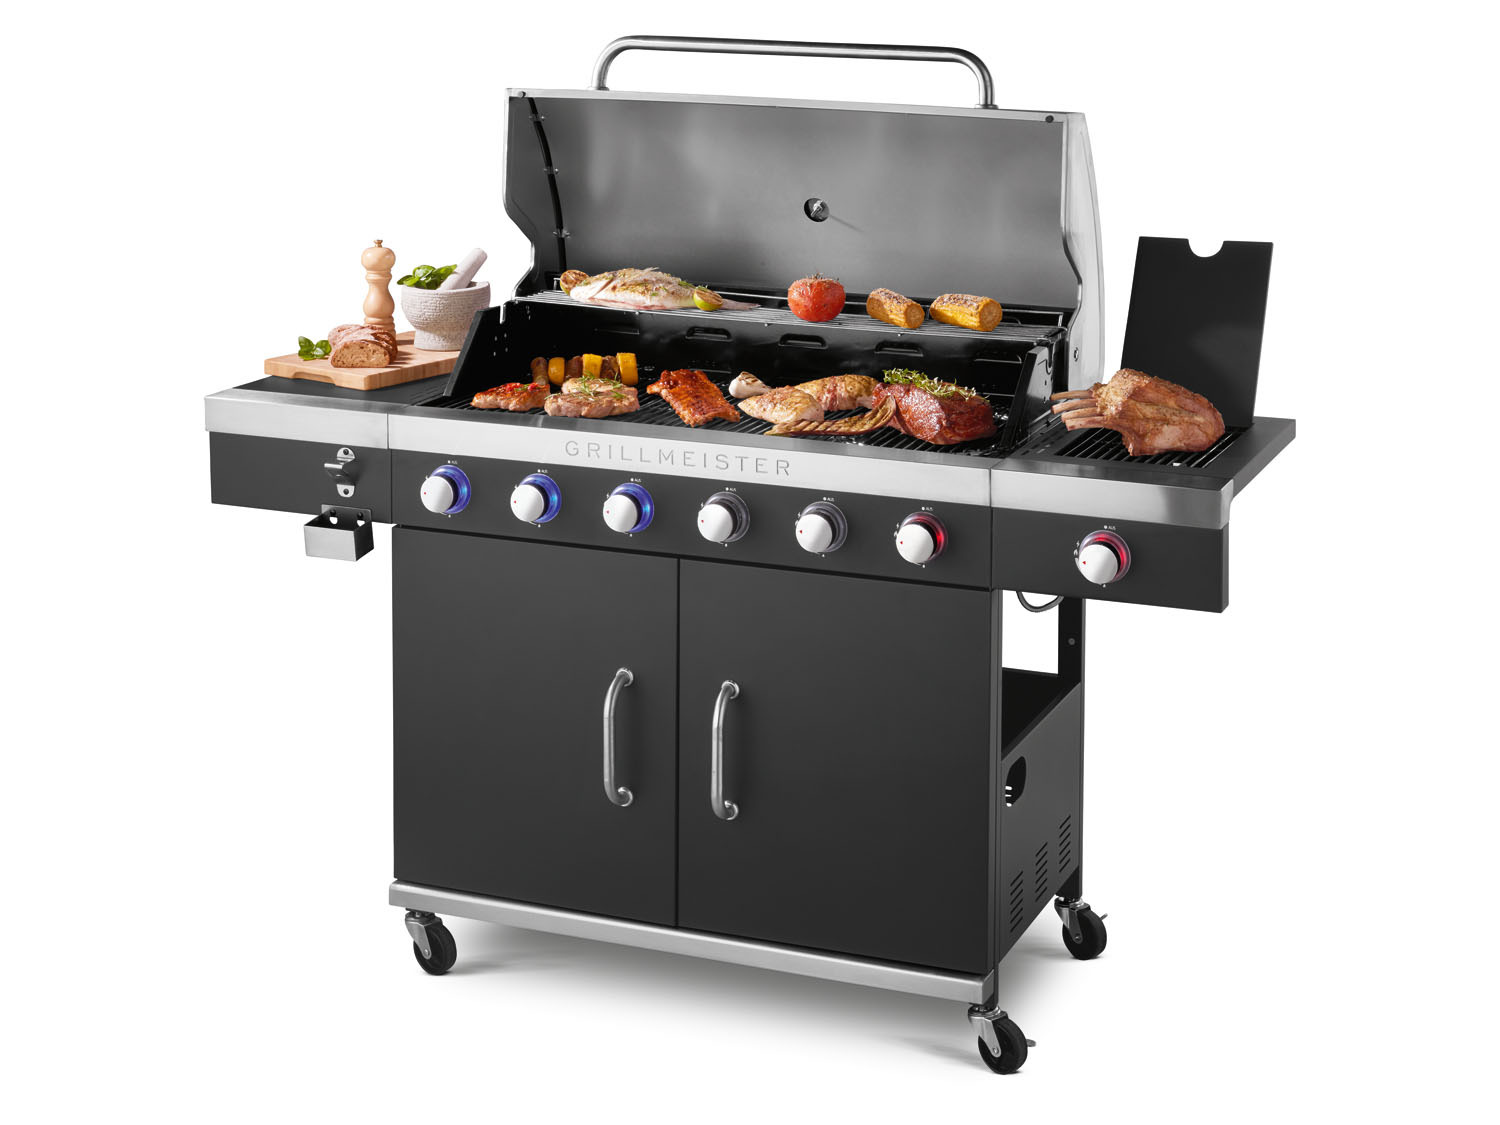 GRILLMEISTER Gasgrill, 6plus1 Brenner, 26,1 LIDL | kW